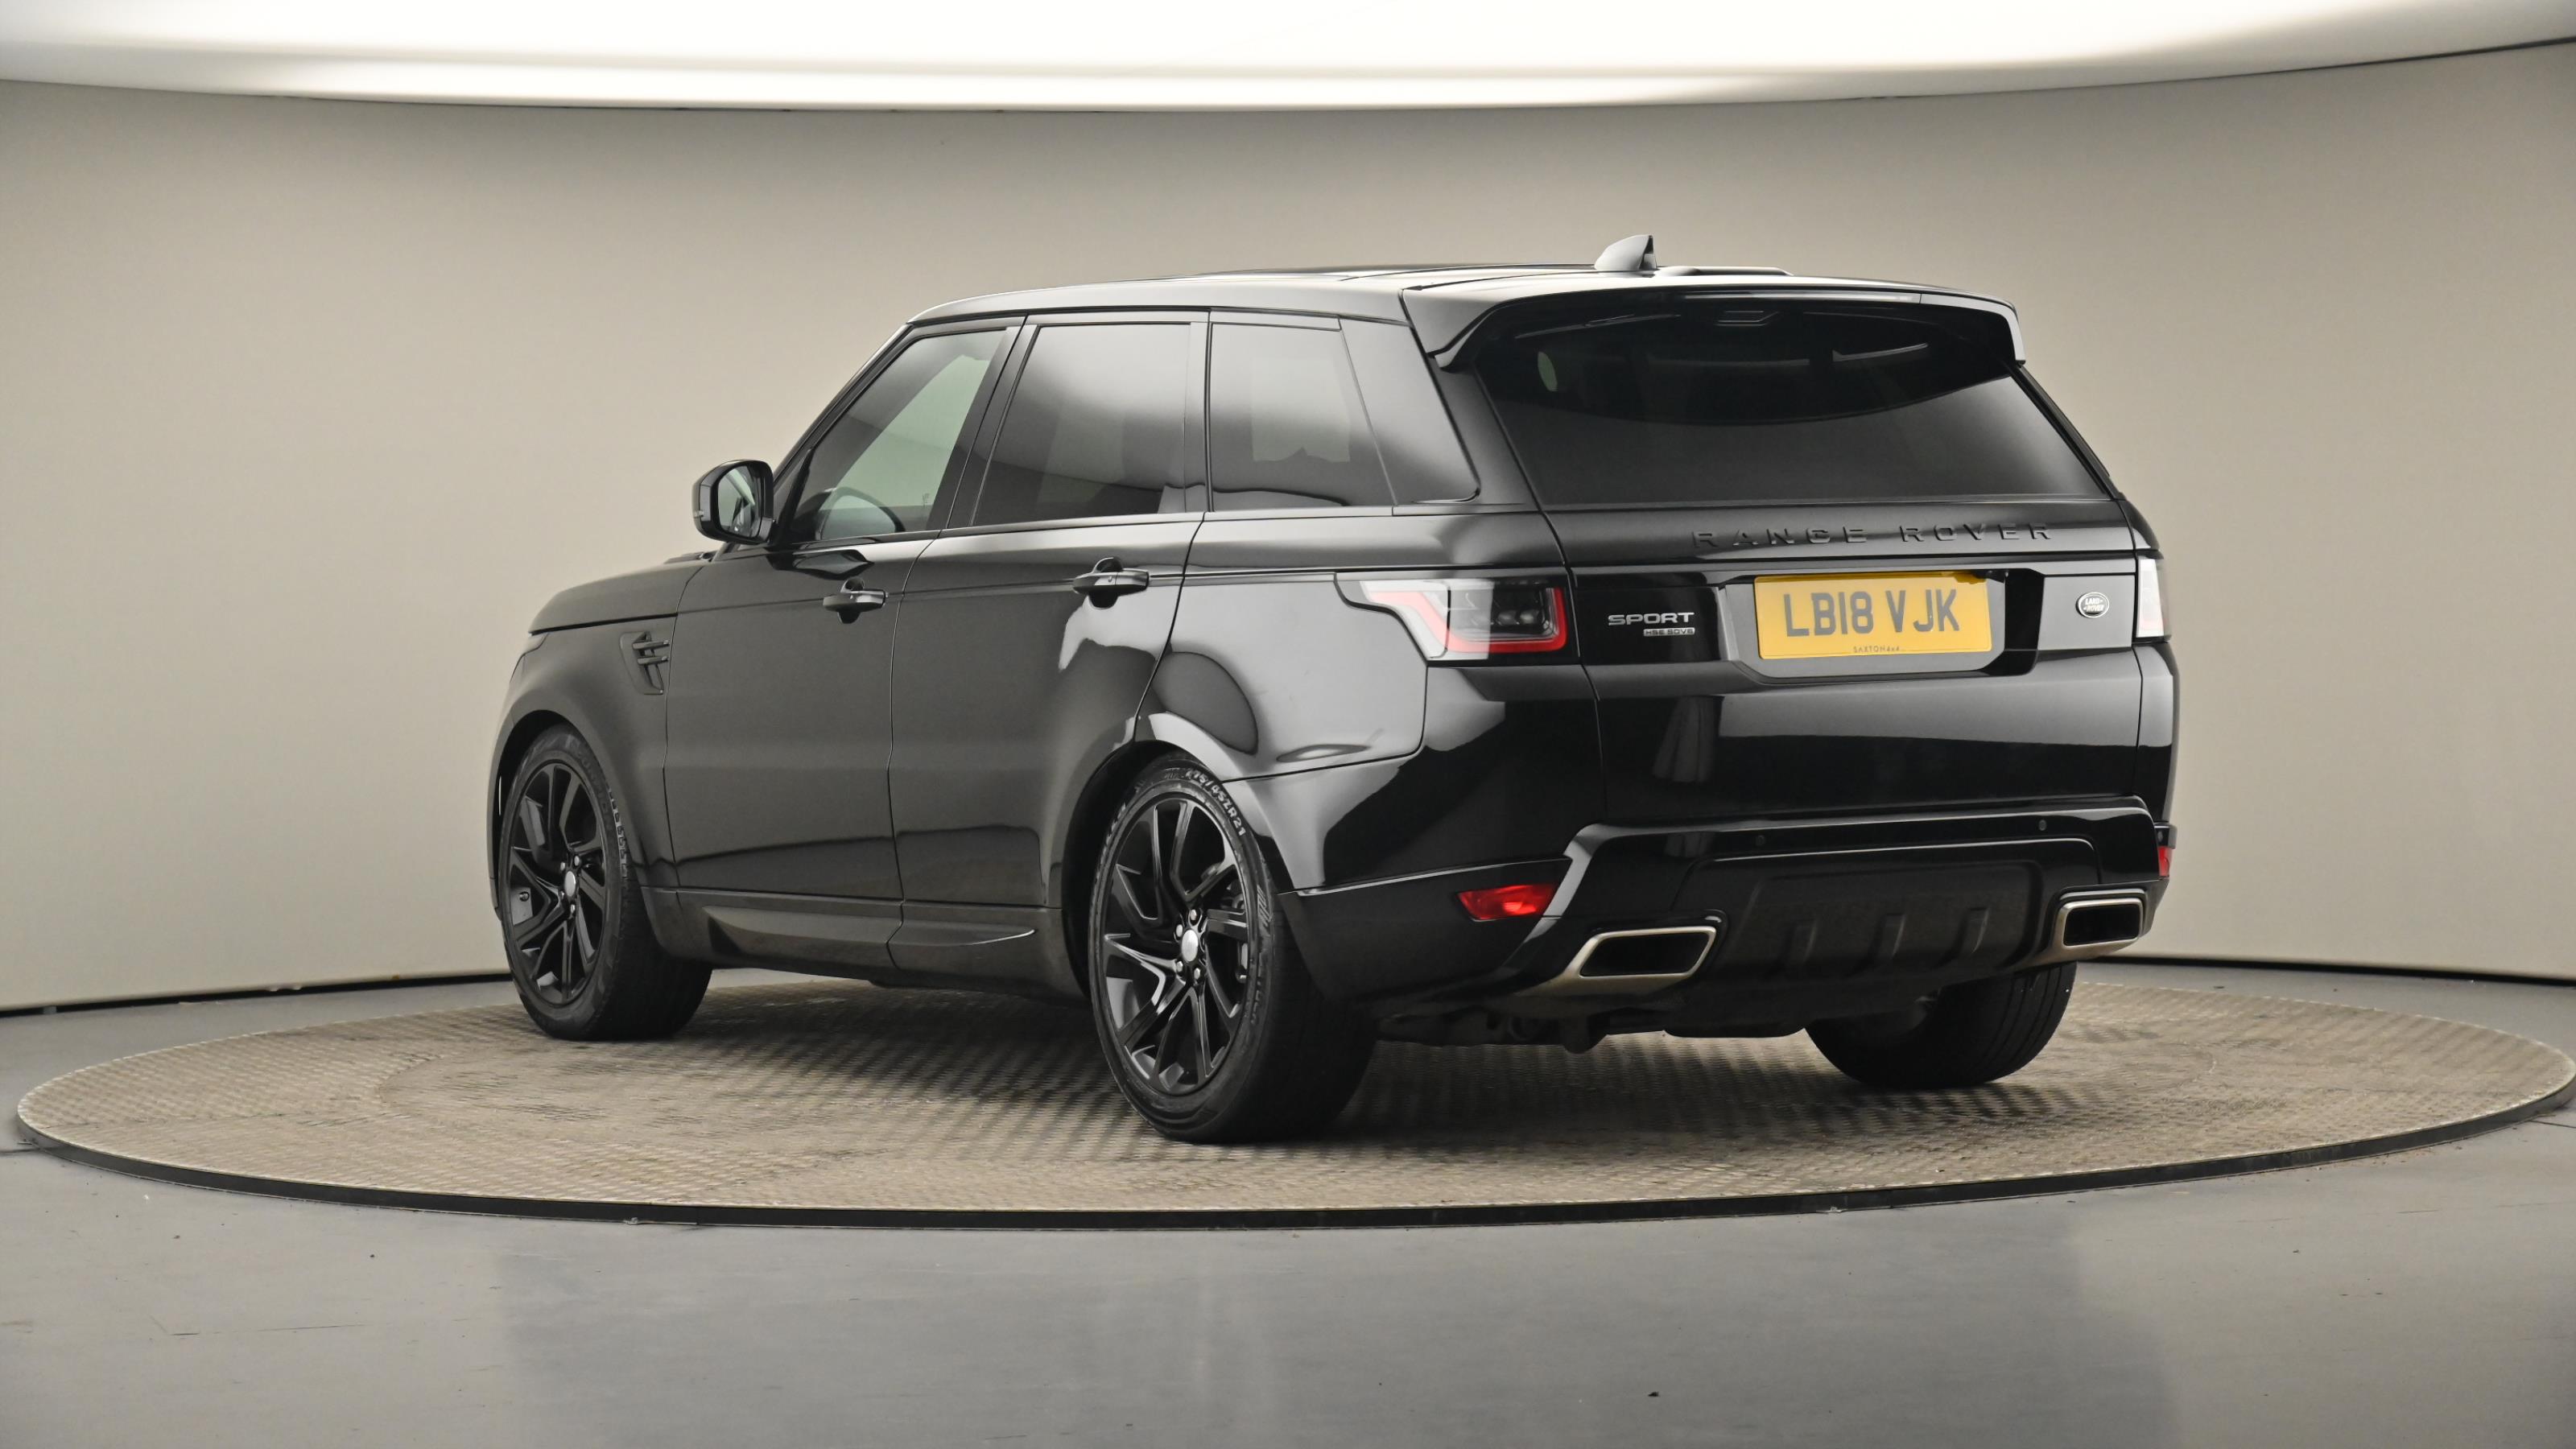 Used 2018 Land Rover RANGE ROVER SPORT 3.0 SDV6 HSE Dynamic 5dr Auto £